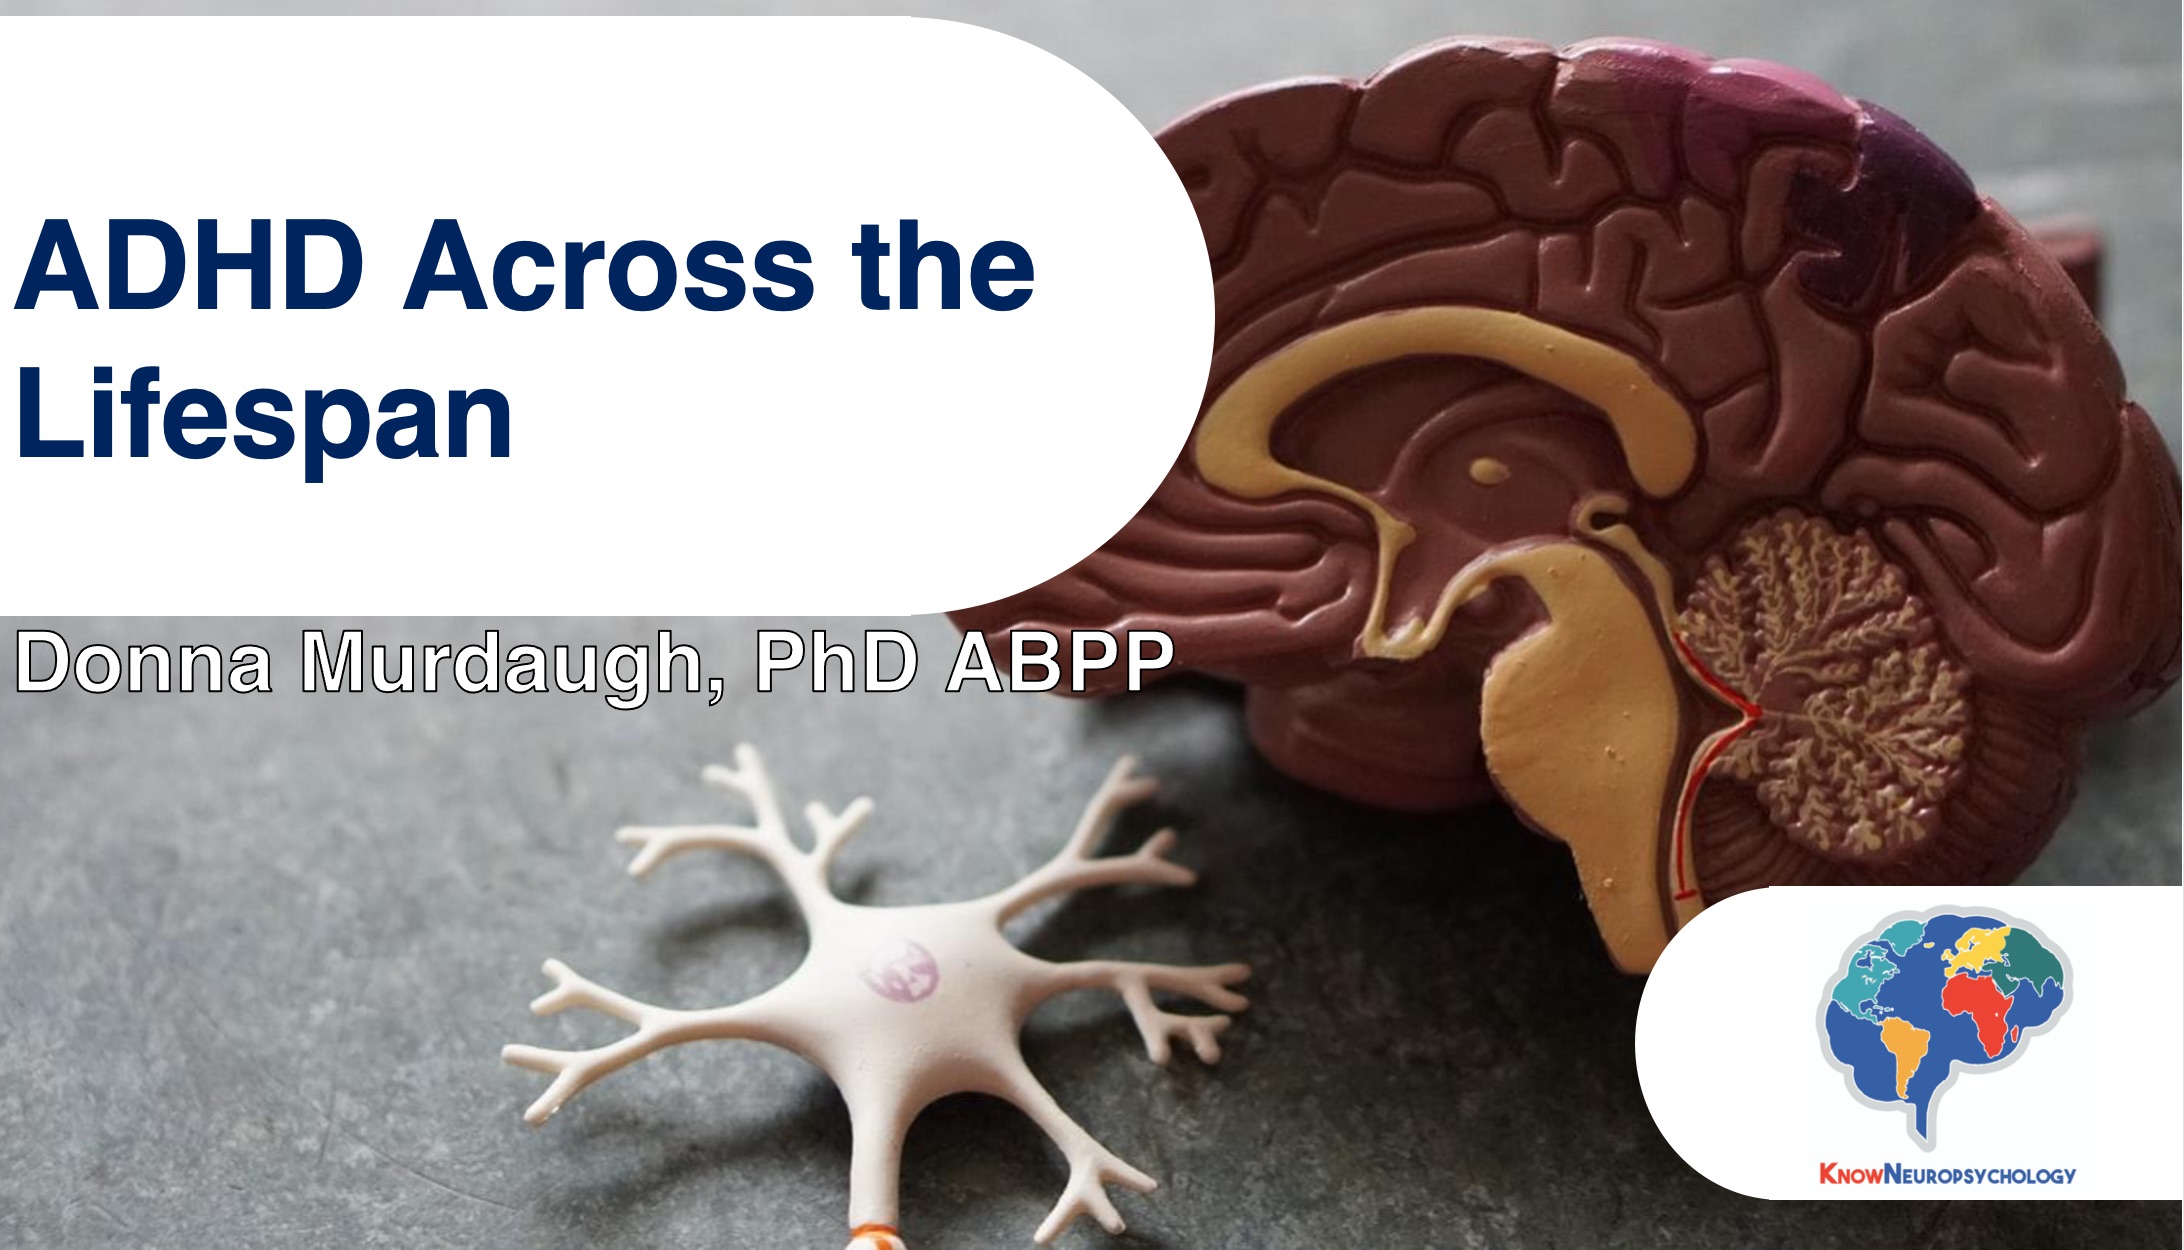 ADHD Across the Lifespan with Dr. Donna Murdaugh